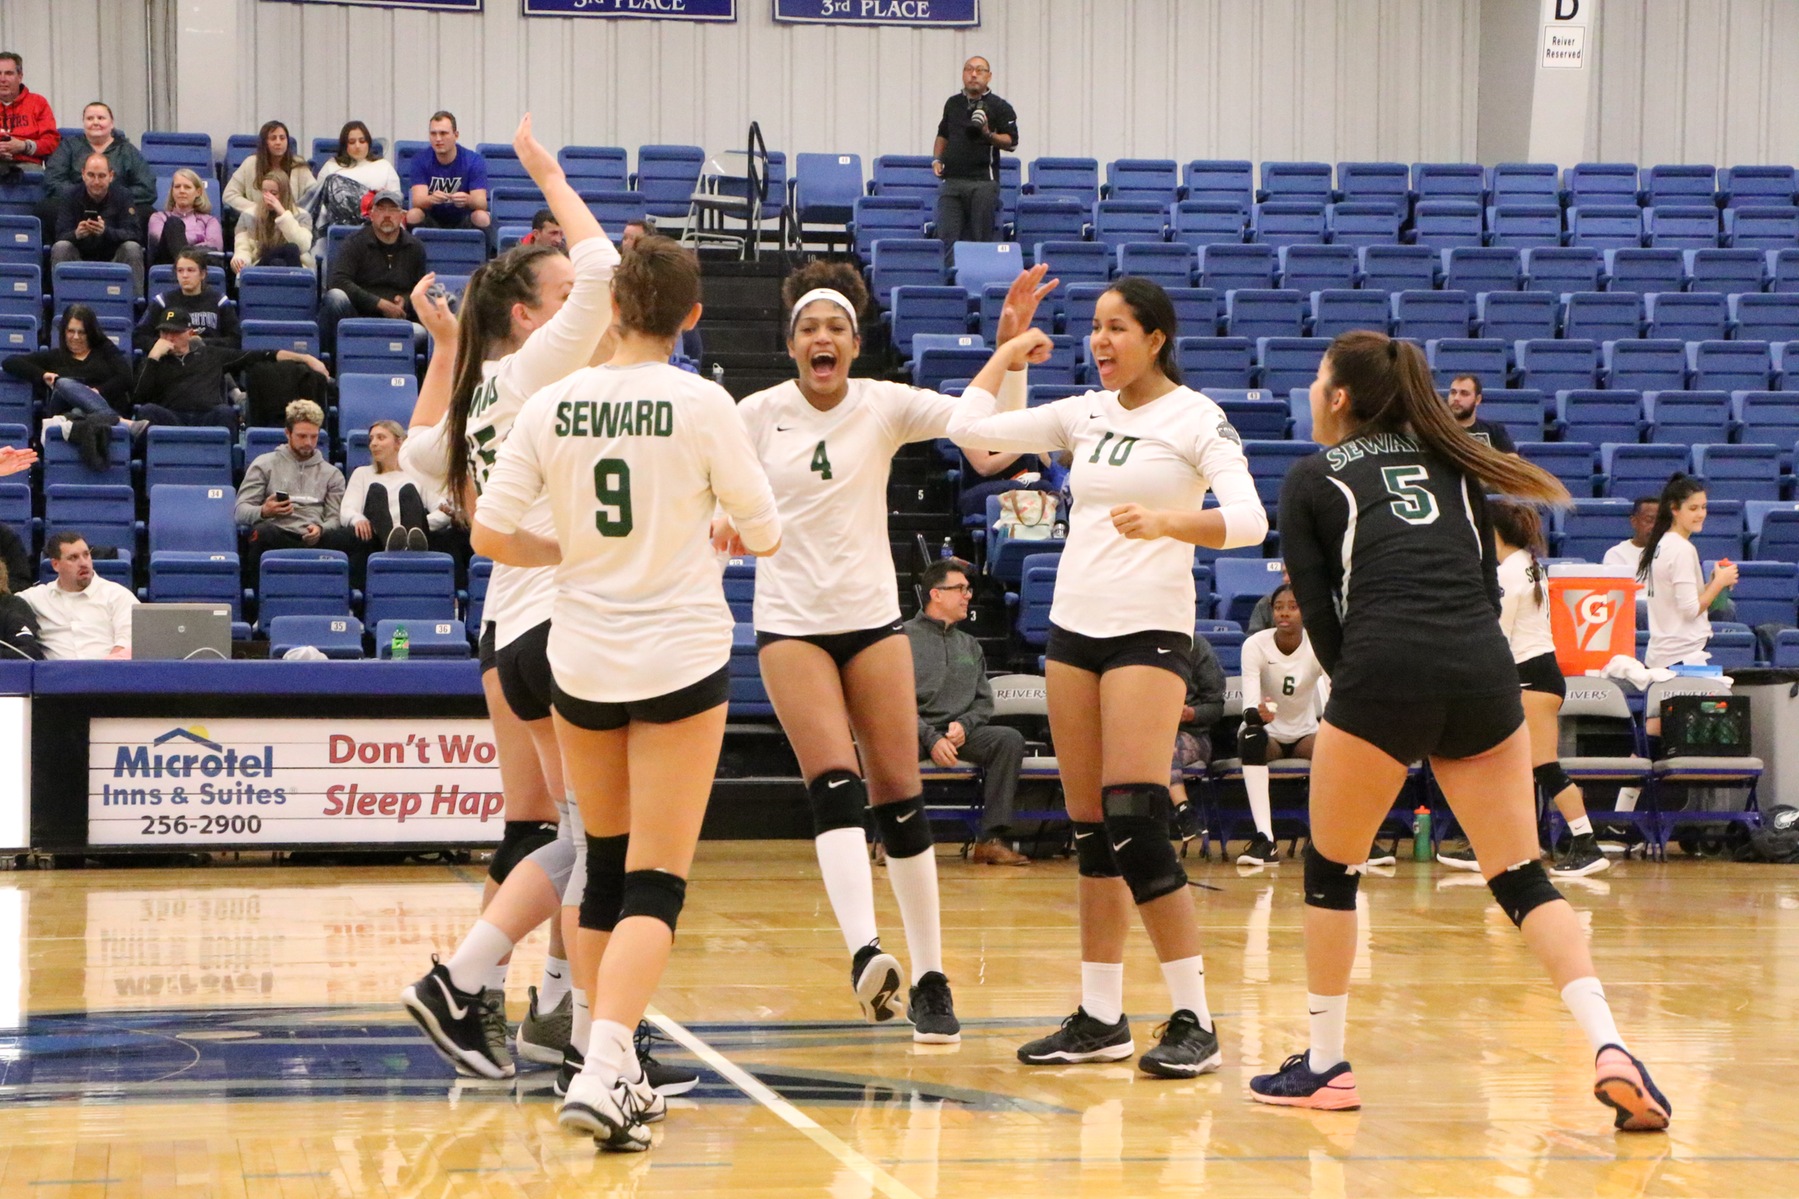 Lady Saints win in sweeping fashion, day one recap from Iowa Western